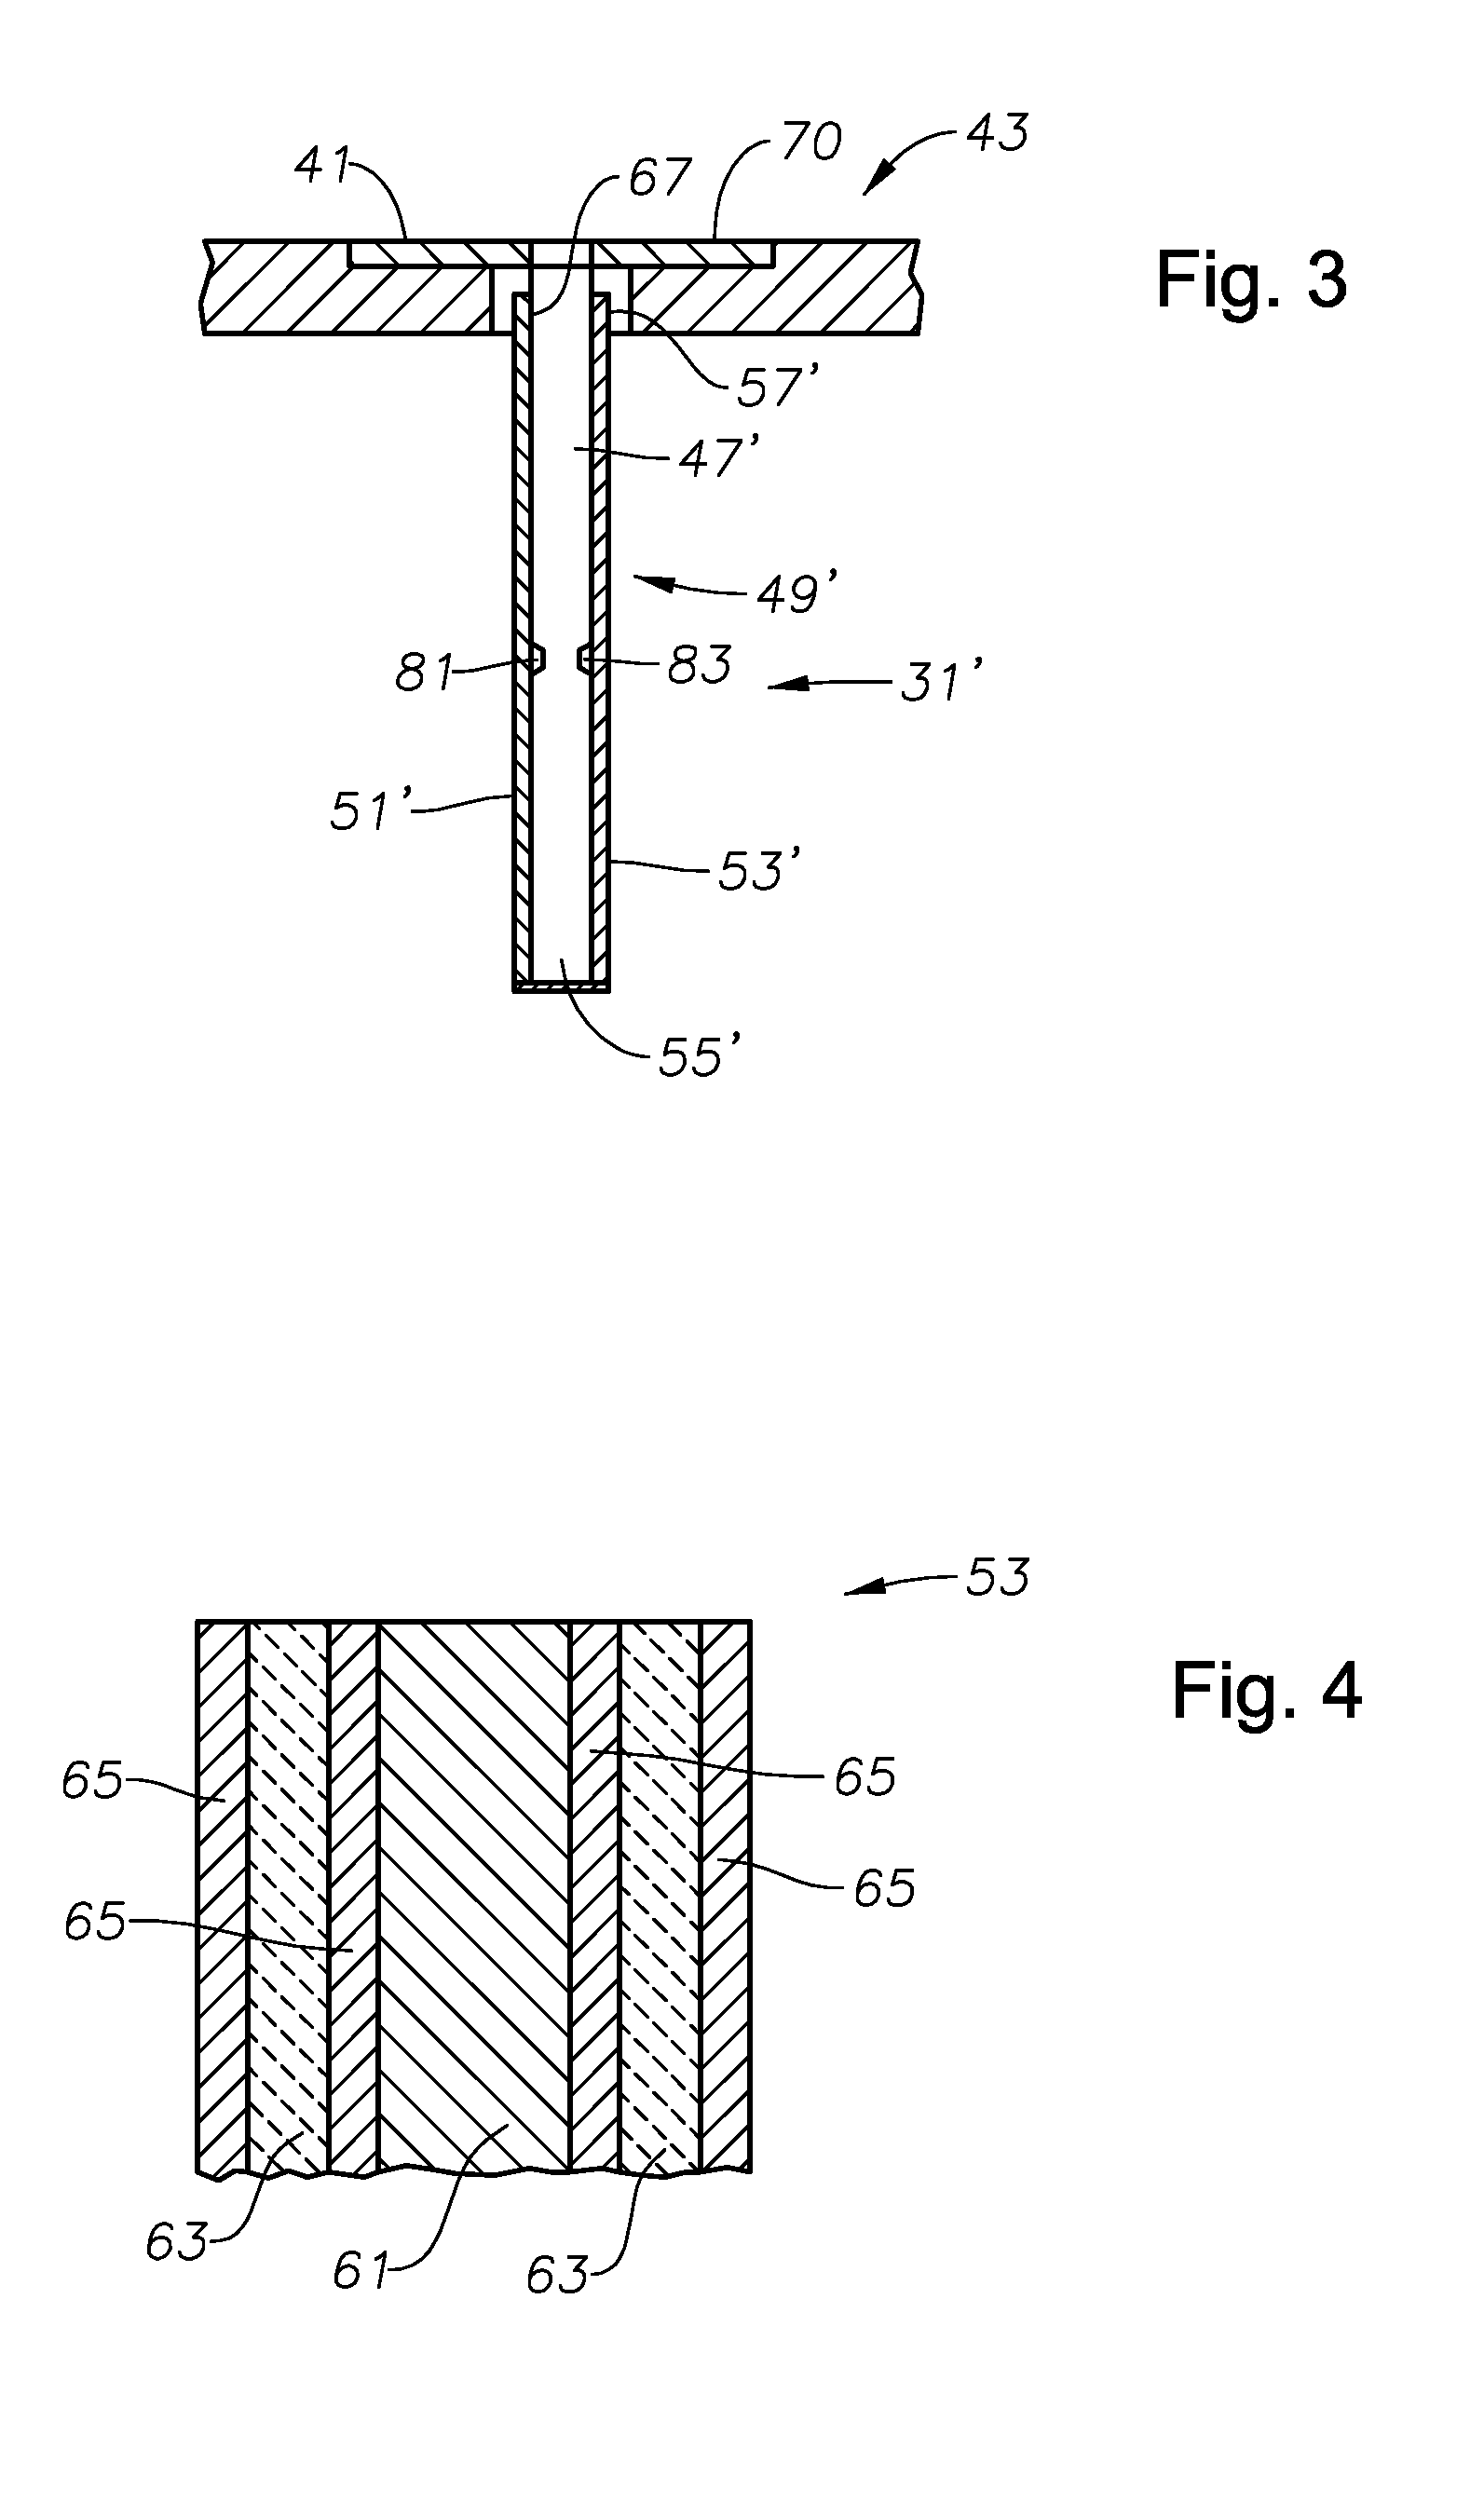 Synthetic Jet Actuator System and Related Methods